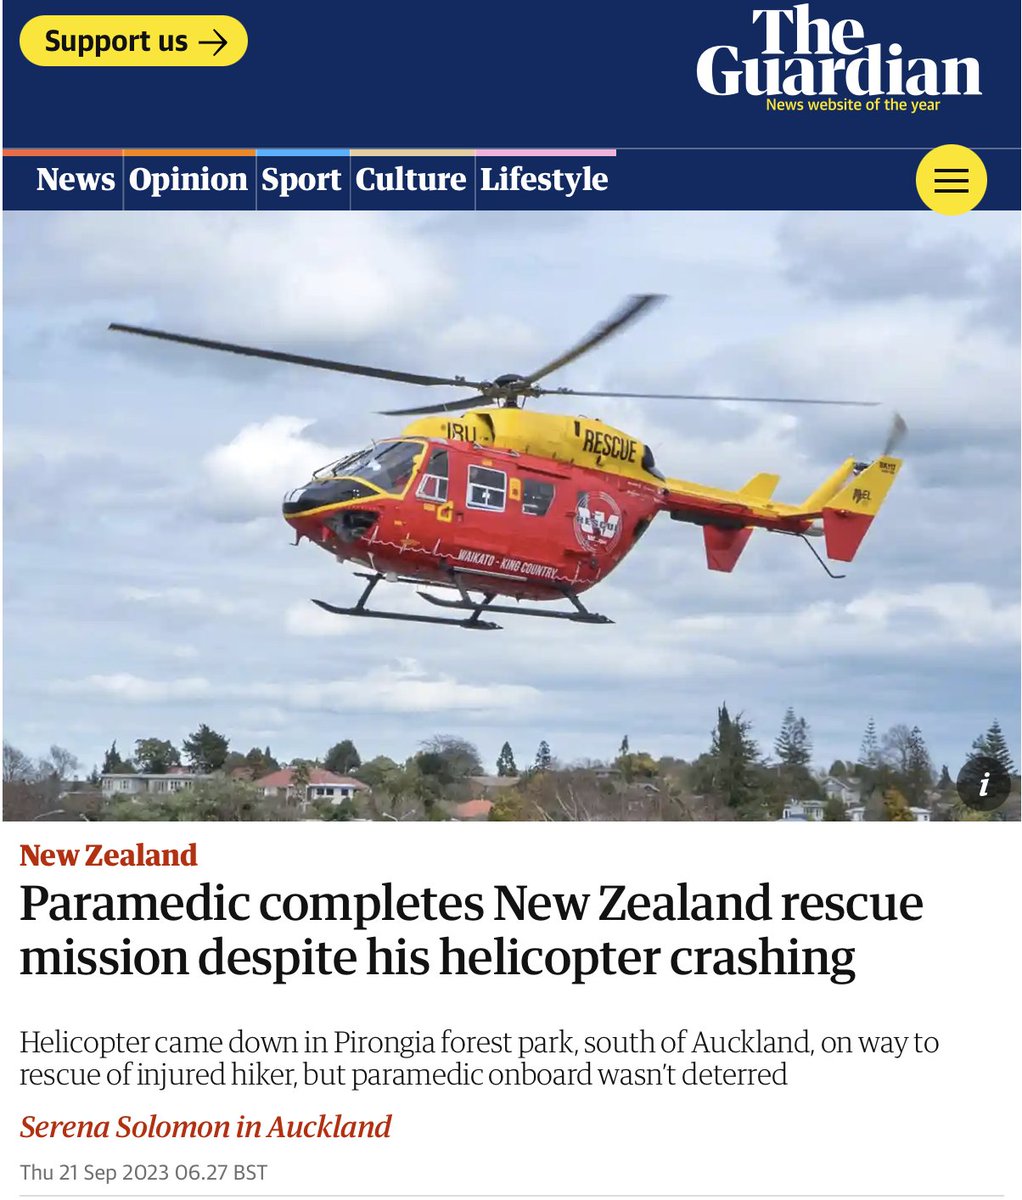 Immense respect for the Waikato paramedic who endured this, then got out & hiked to the patient they were supposed to be rescuing. All escaped intact. amp.theguardian.com/world/2023/sep…